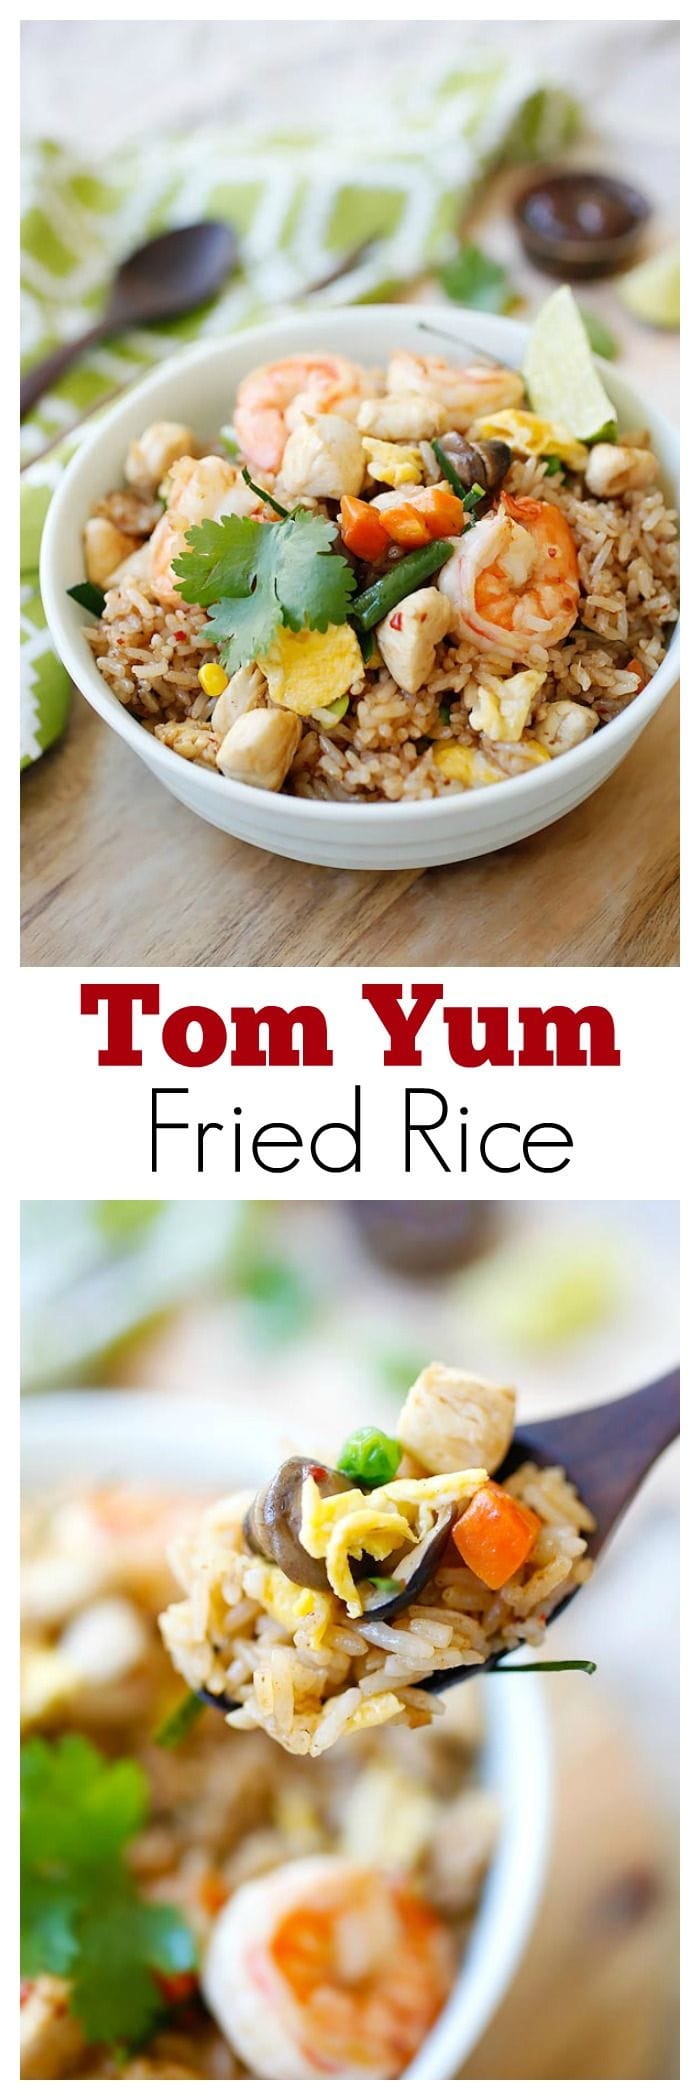 Tom Yum Fried Rice – your favorite Thai Tom Yum Flavor in a fried rice dish. The most amazing fried rice with exotic flavors that you can’t stop eating | rasamalaysia.com